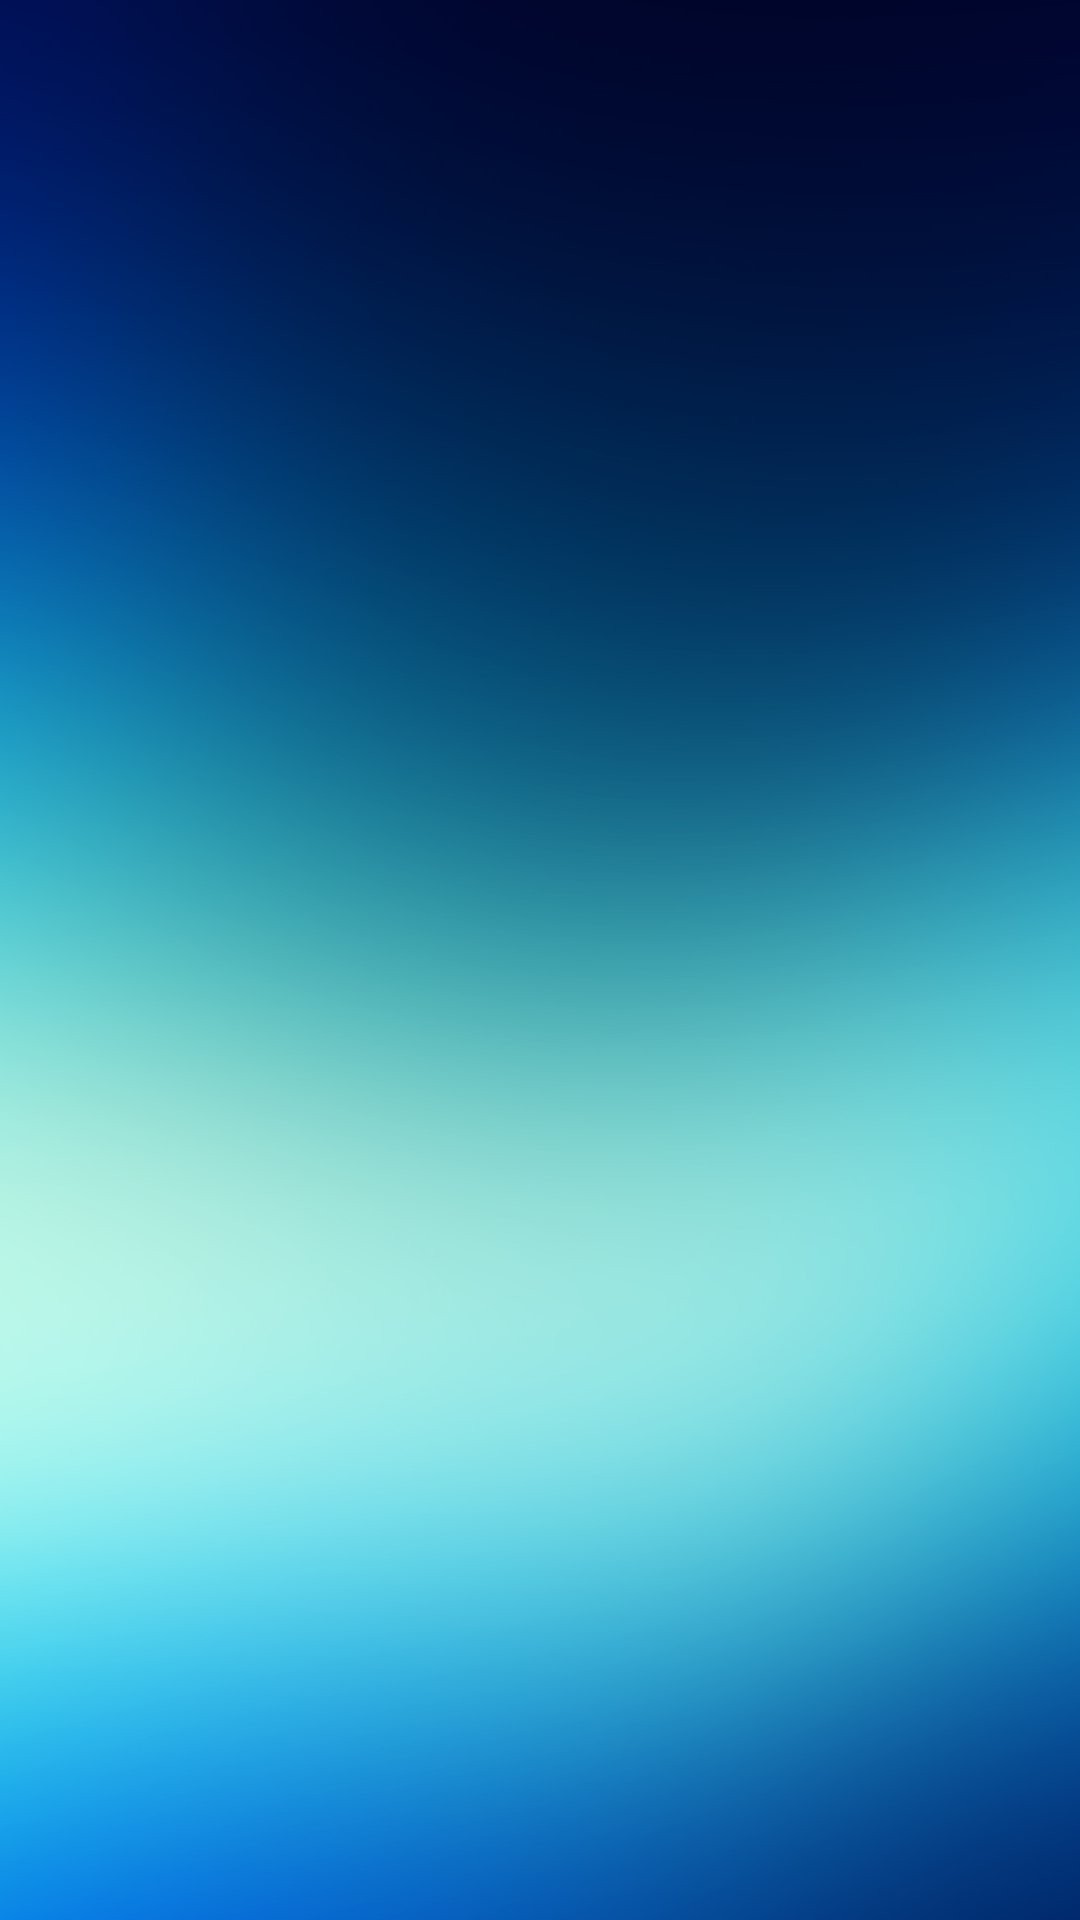 Blue Blur iPhone 6 Plus Wallpaper 26343 – Abstract iPhone 6 Plus Wallpapers